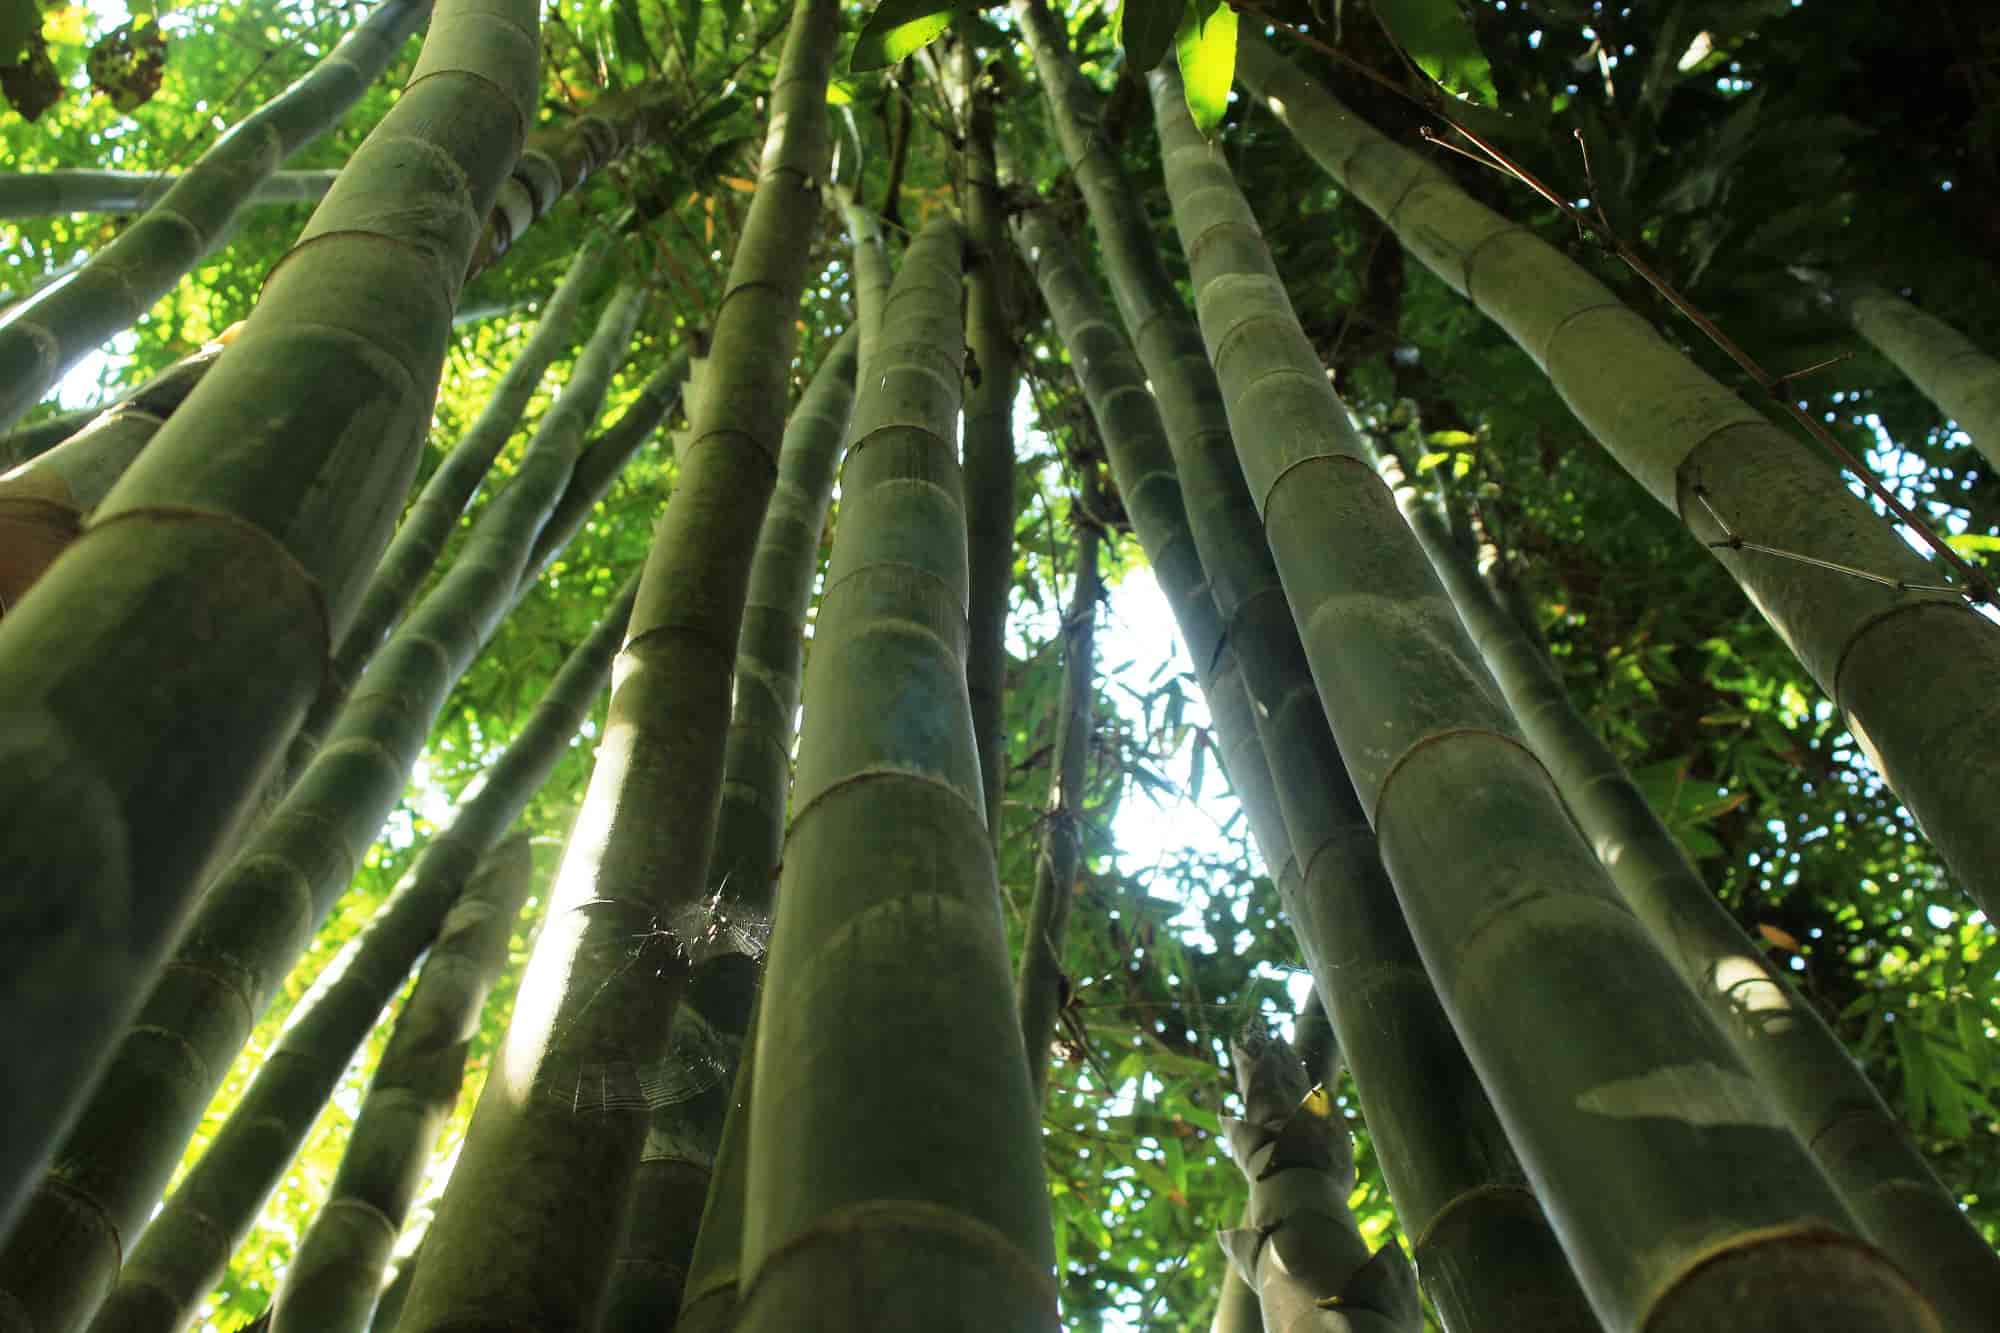 What are the uses of the bamboo plant and its most beneficial feature?